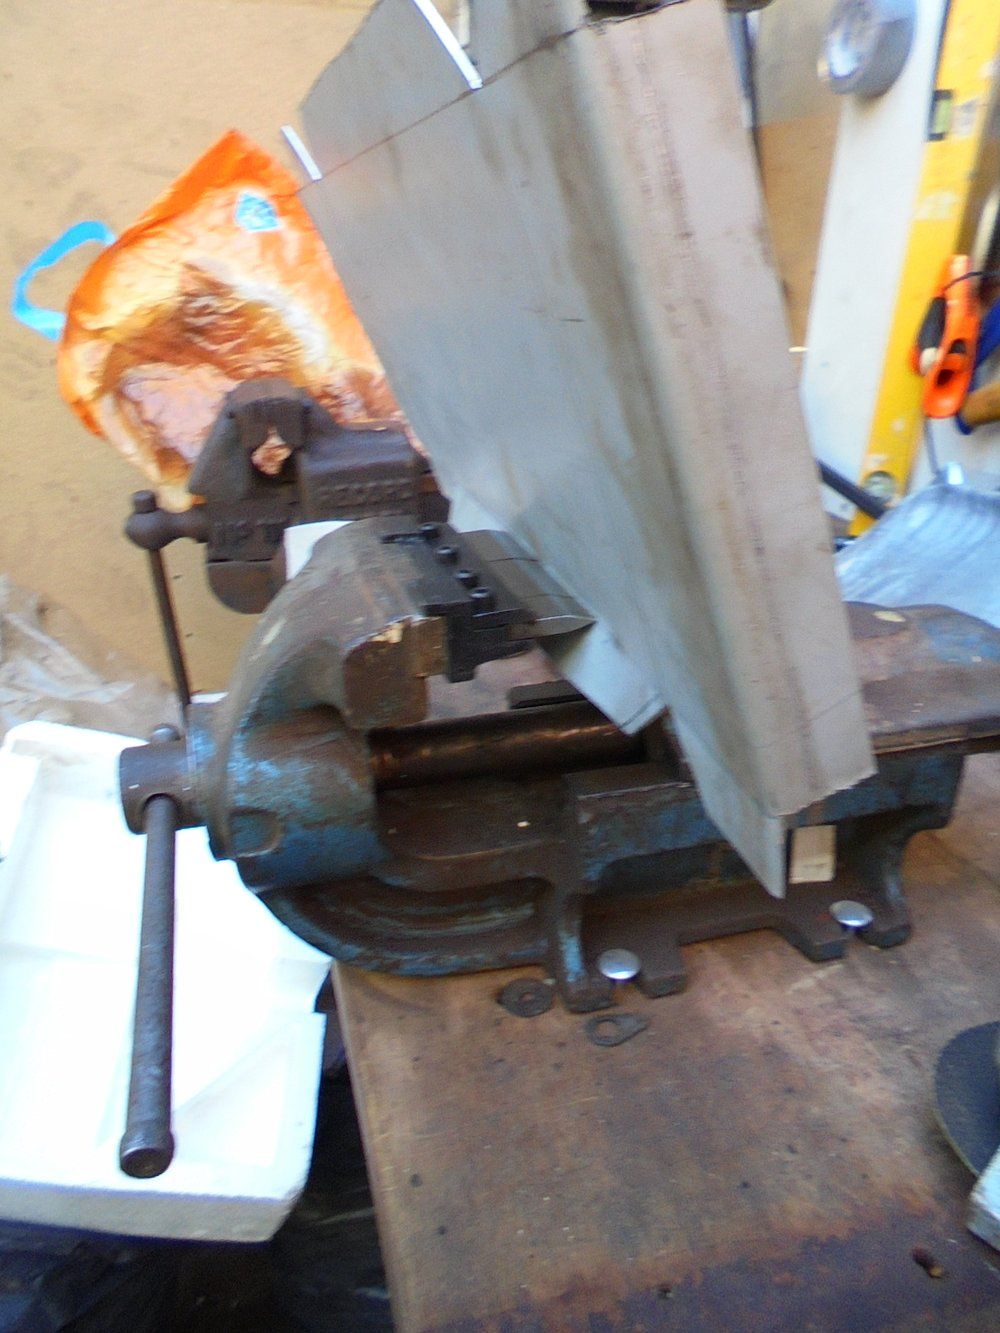 1965 series 2a station wagon battery box bending in the vice.JPG